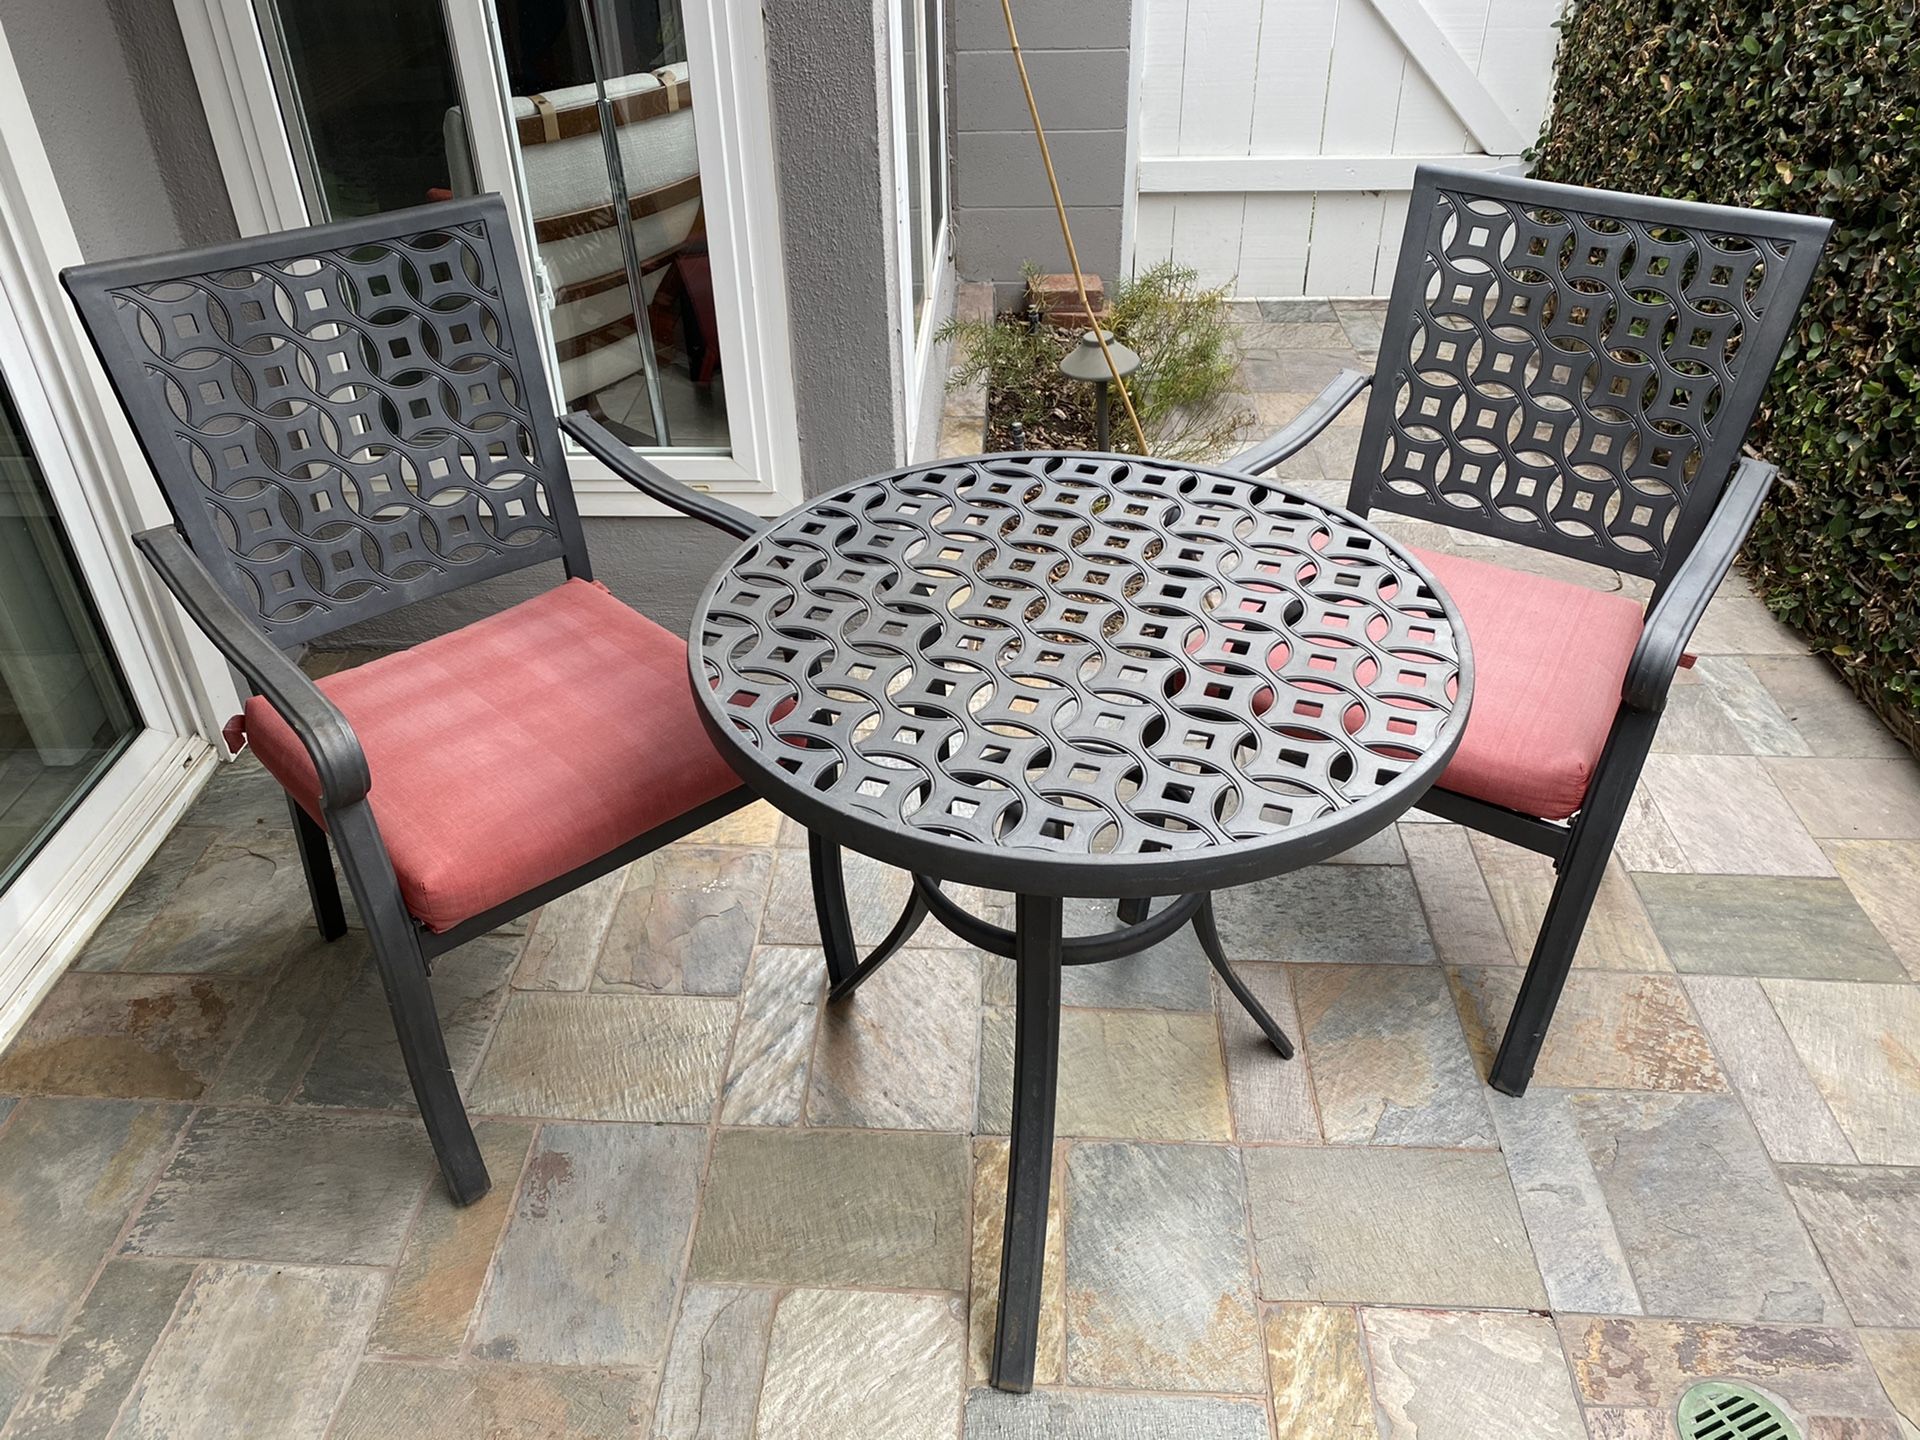 Free patio set: metal table & 2 chairs